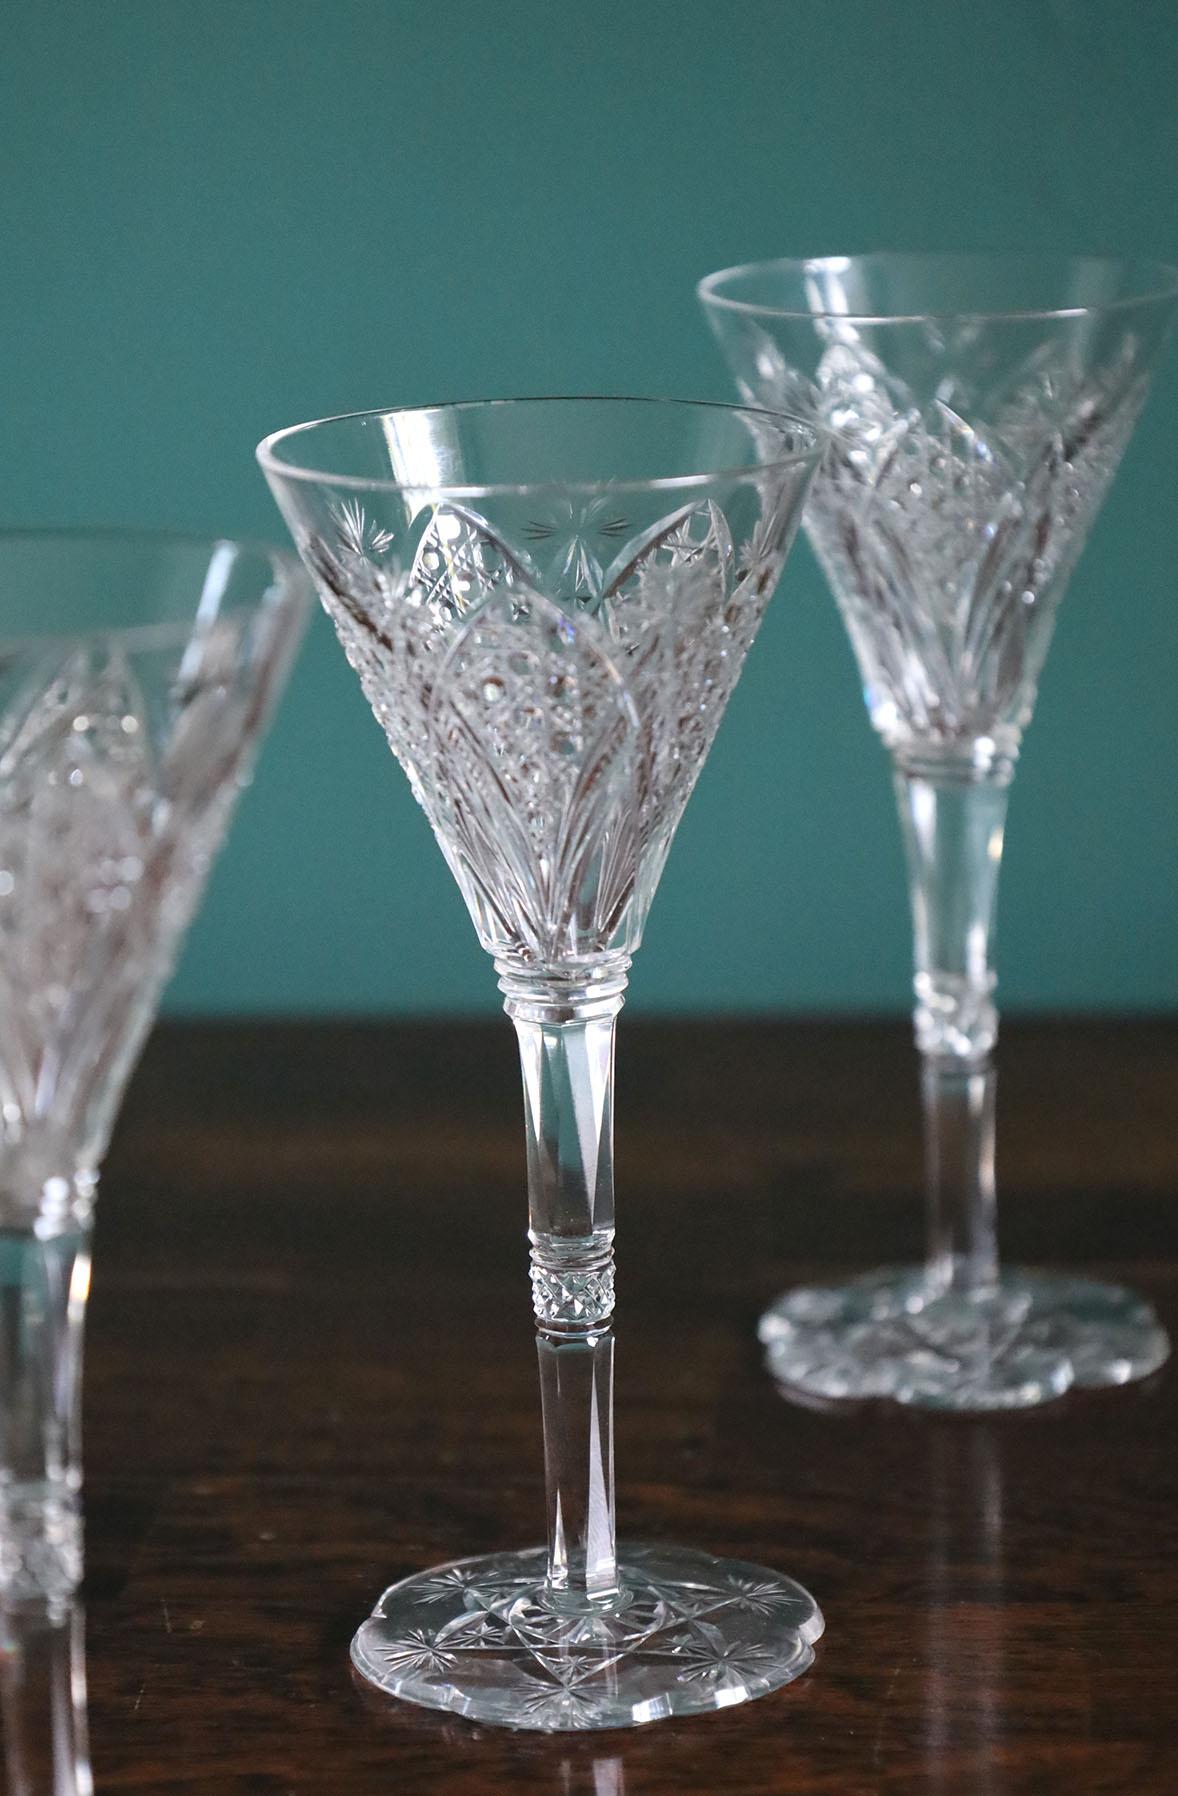 Set of 6 Baccarat Hand Blown Elbeuf Cut Crystal Liquor Glasses In Good Condition For Sale In Mérida, YU